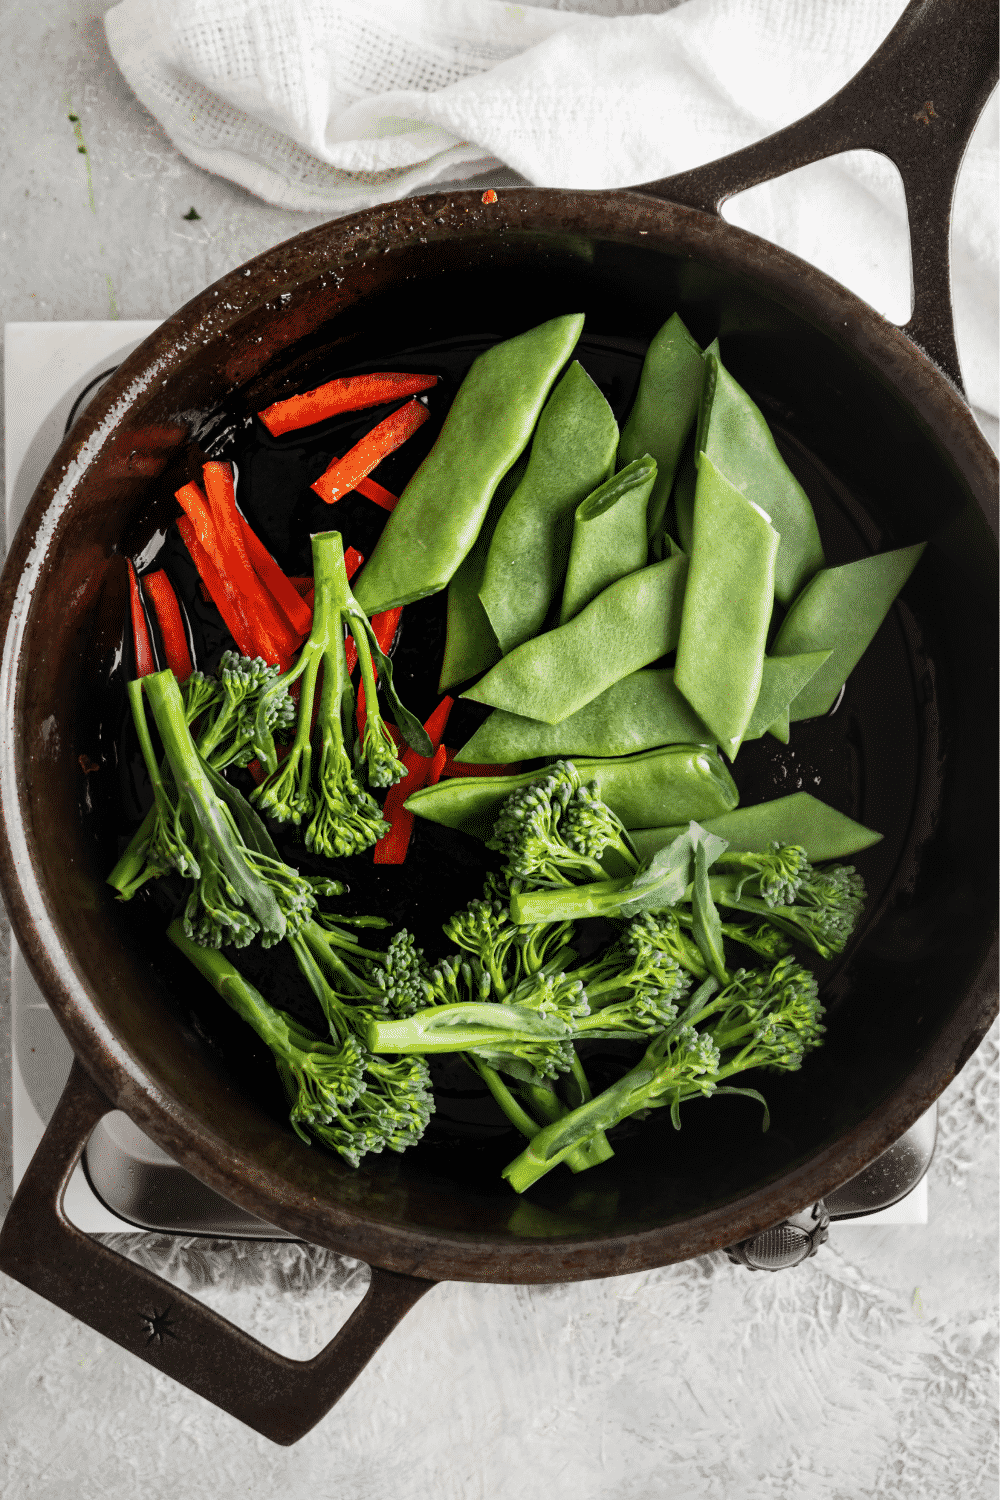 Broccoli, snow peas, and sliced red pepper in a black skillet.